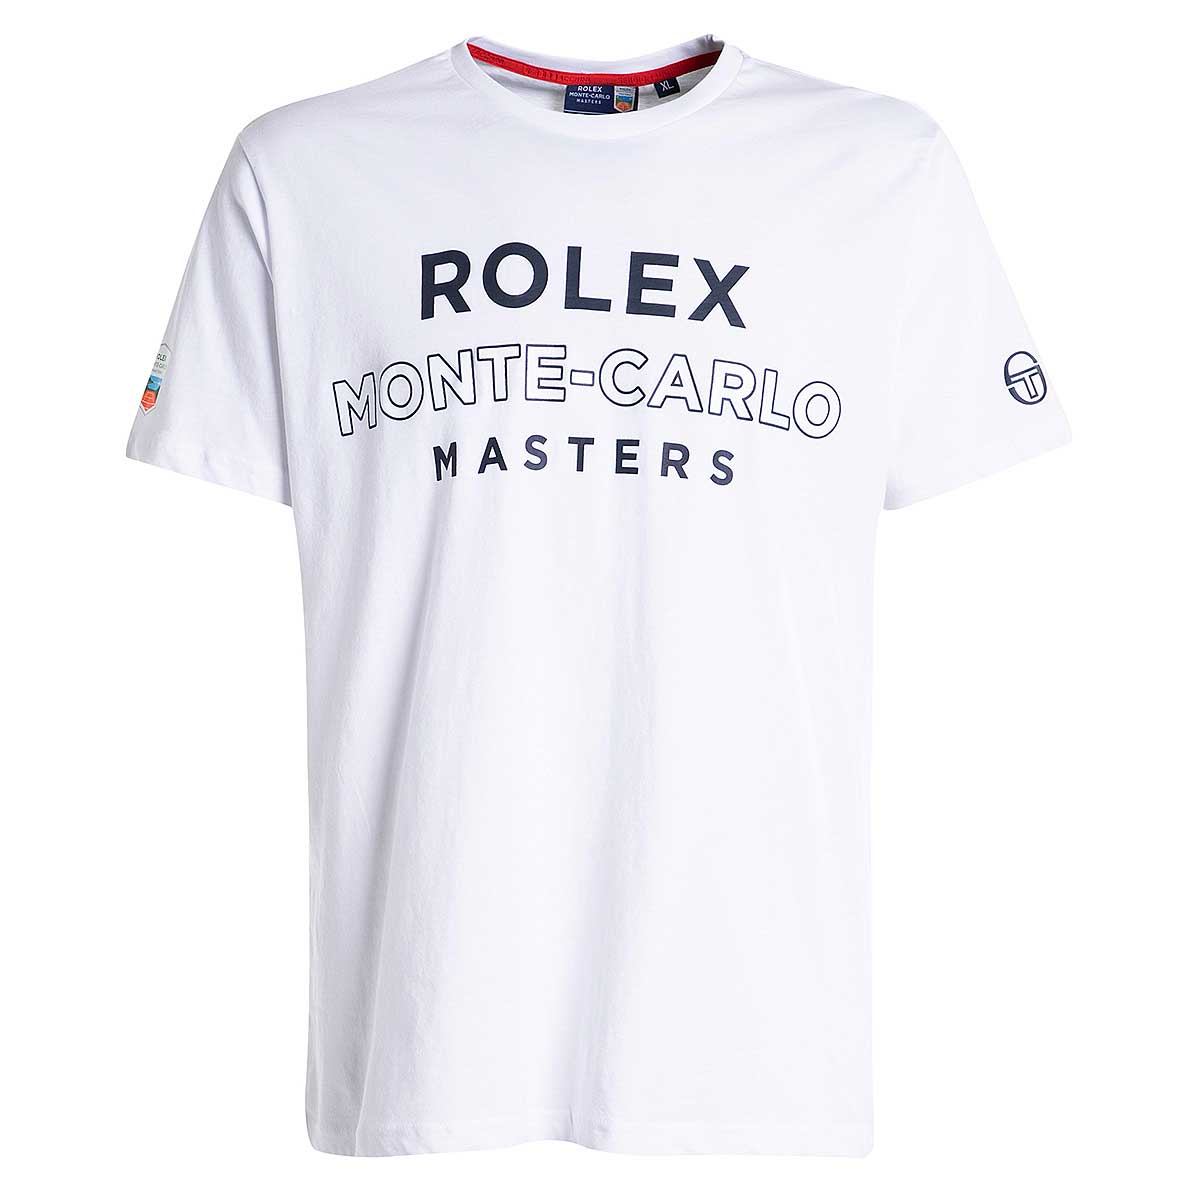 Buy ROLEX Cable T-SHIRT for N/A 0.0 on KICKZ.com!